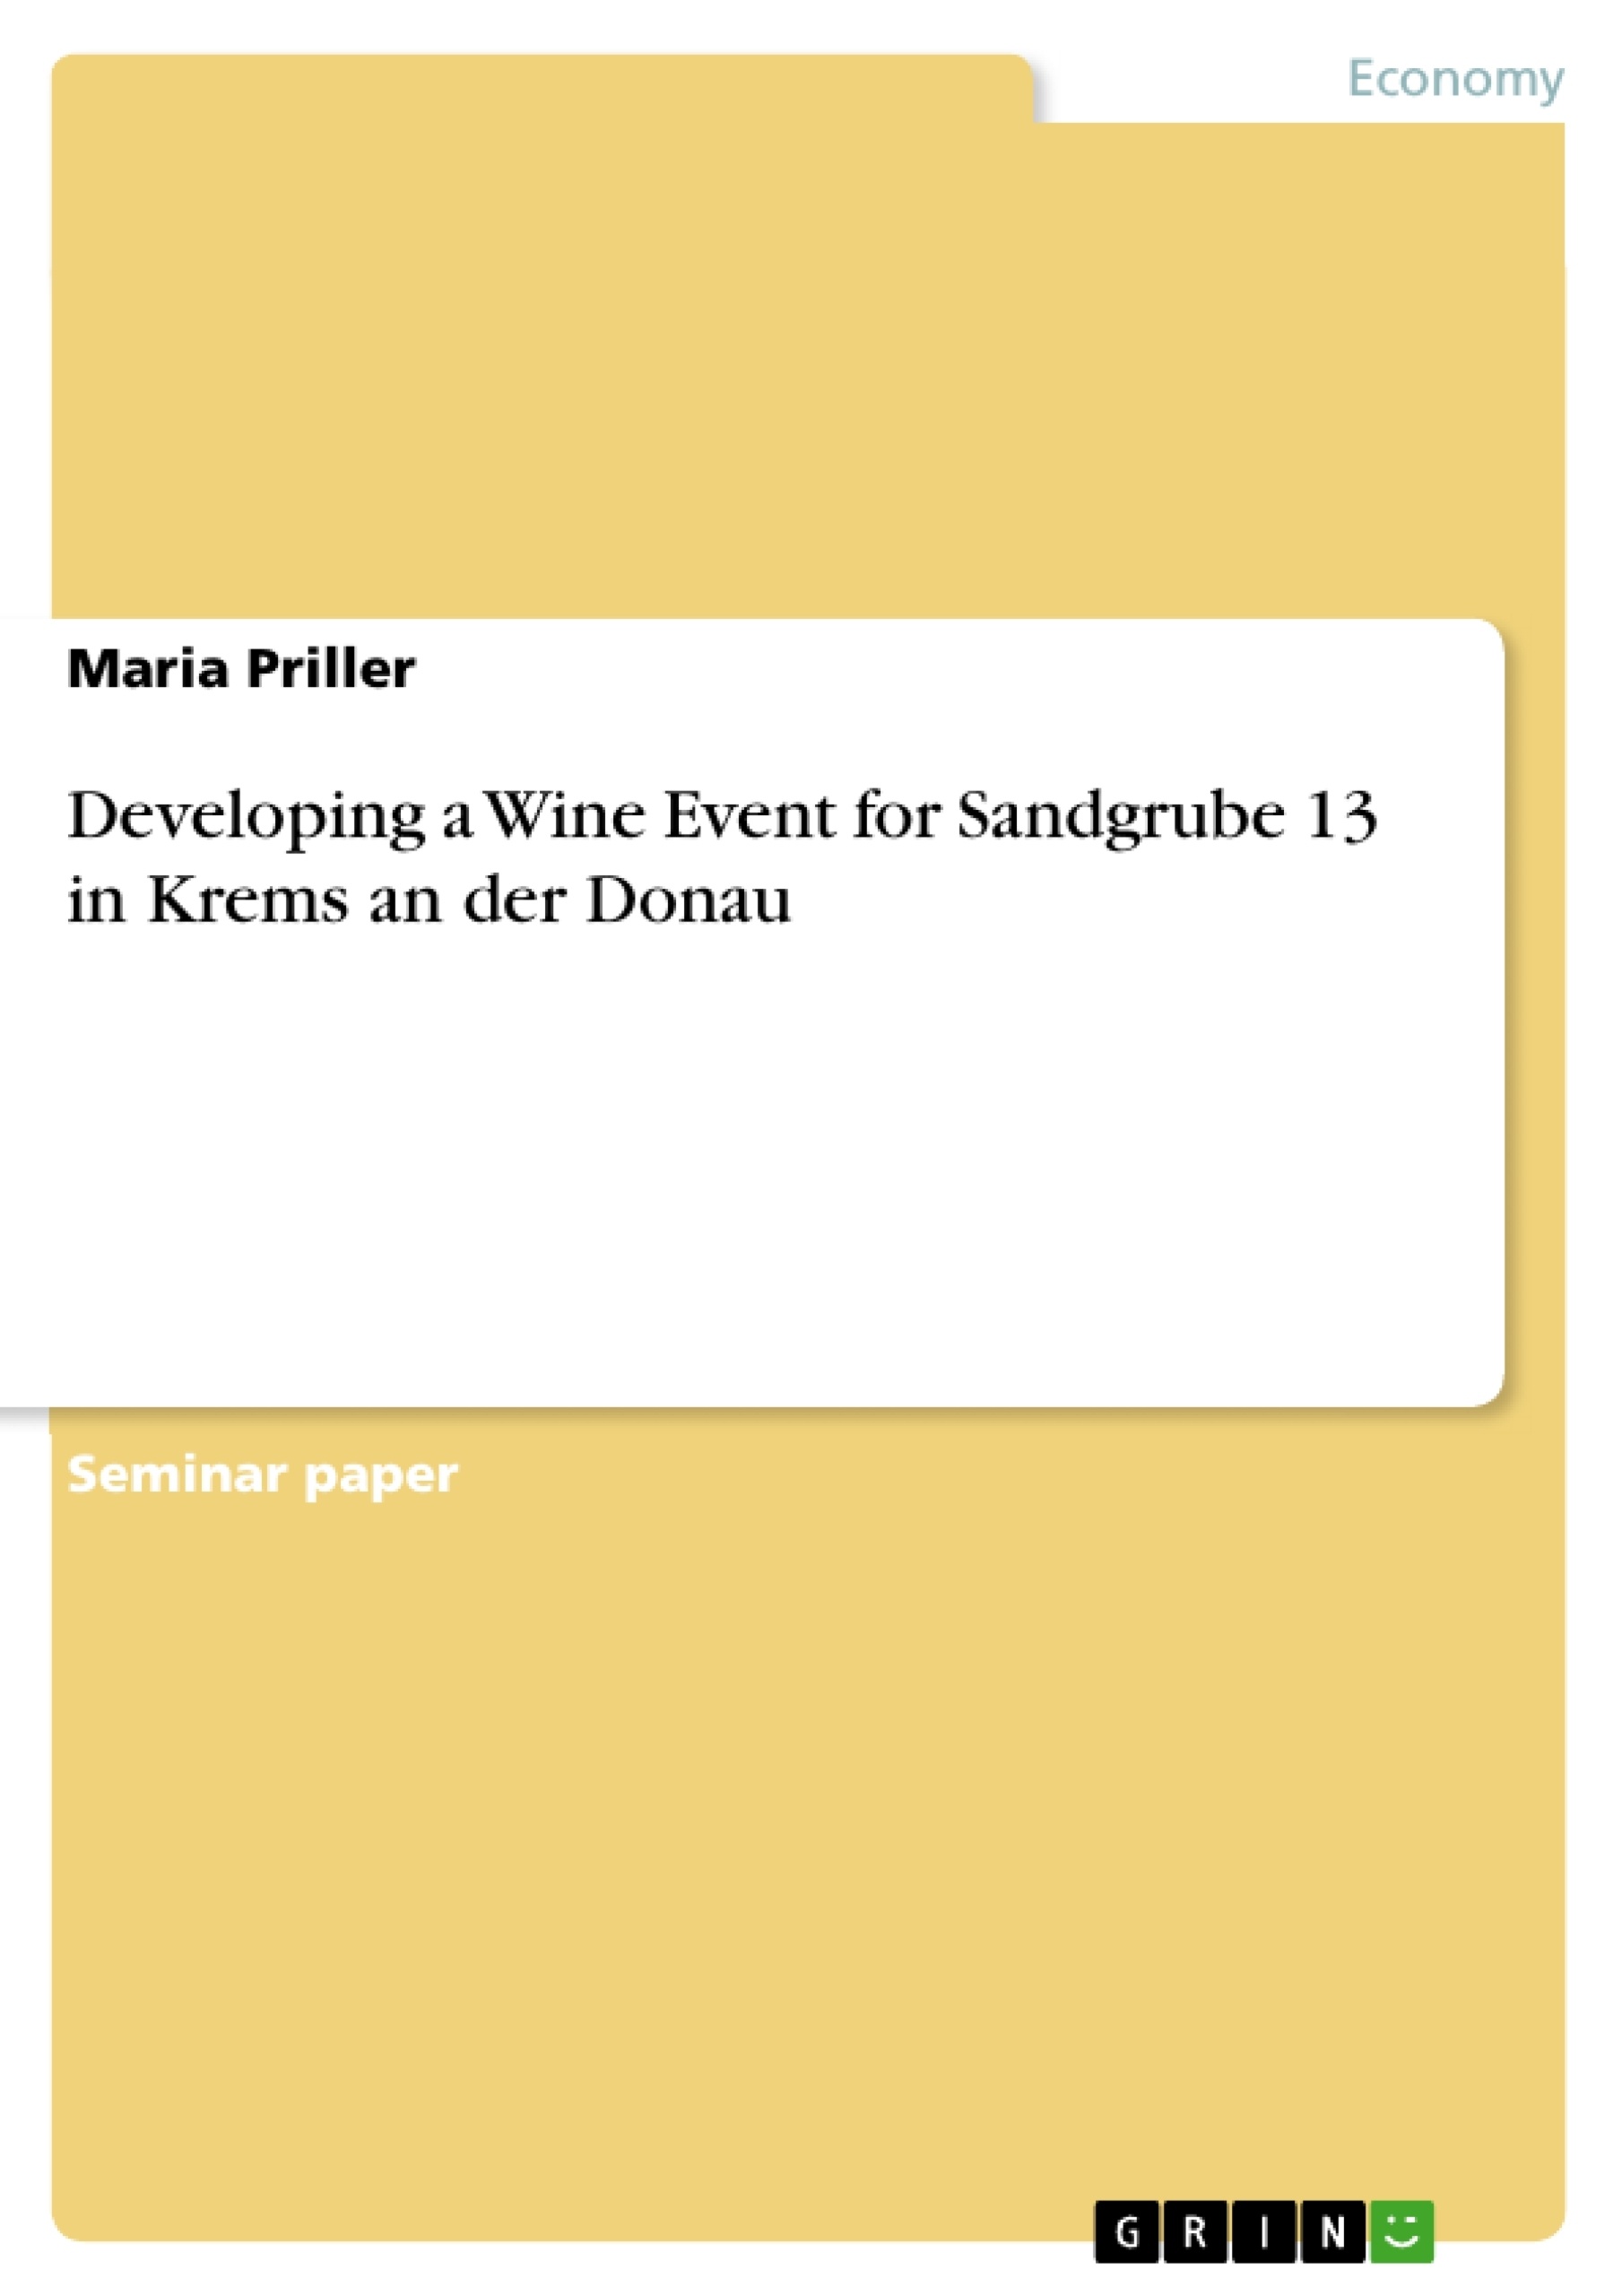 Titre: Developing a Wine Event for Sandgrube 13 in Krems an der Donau